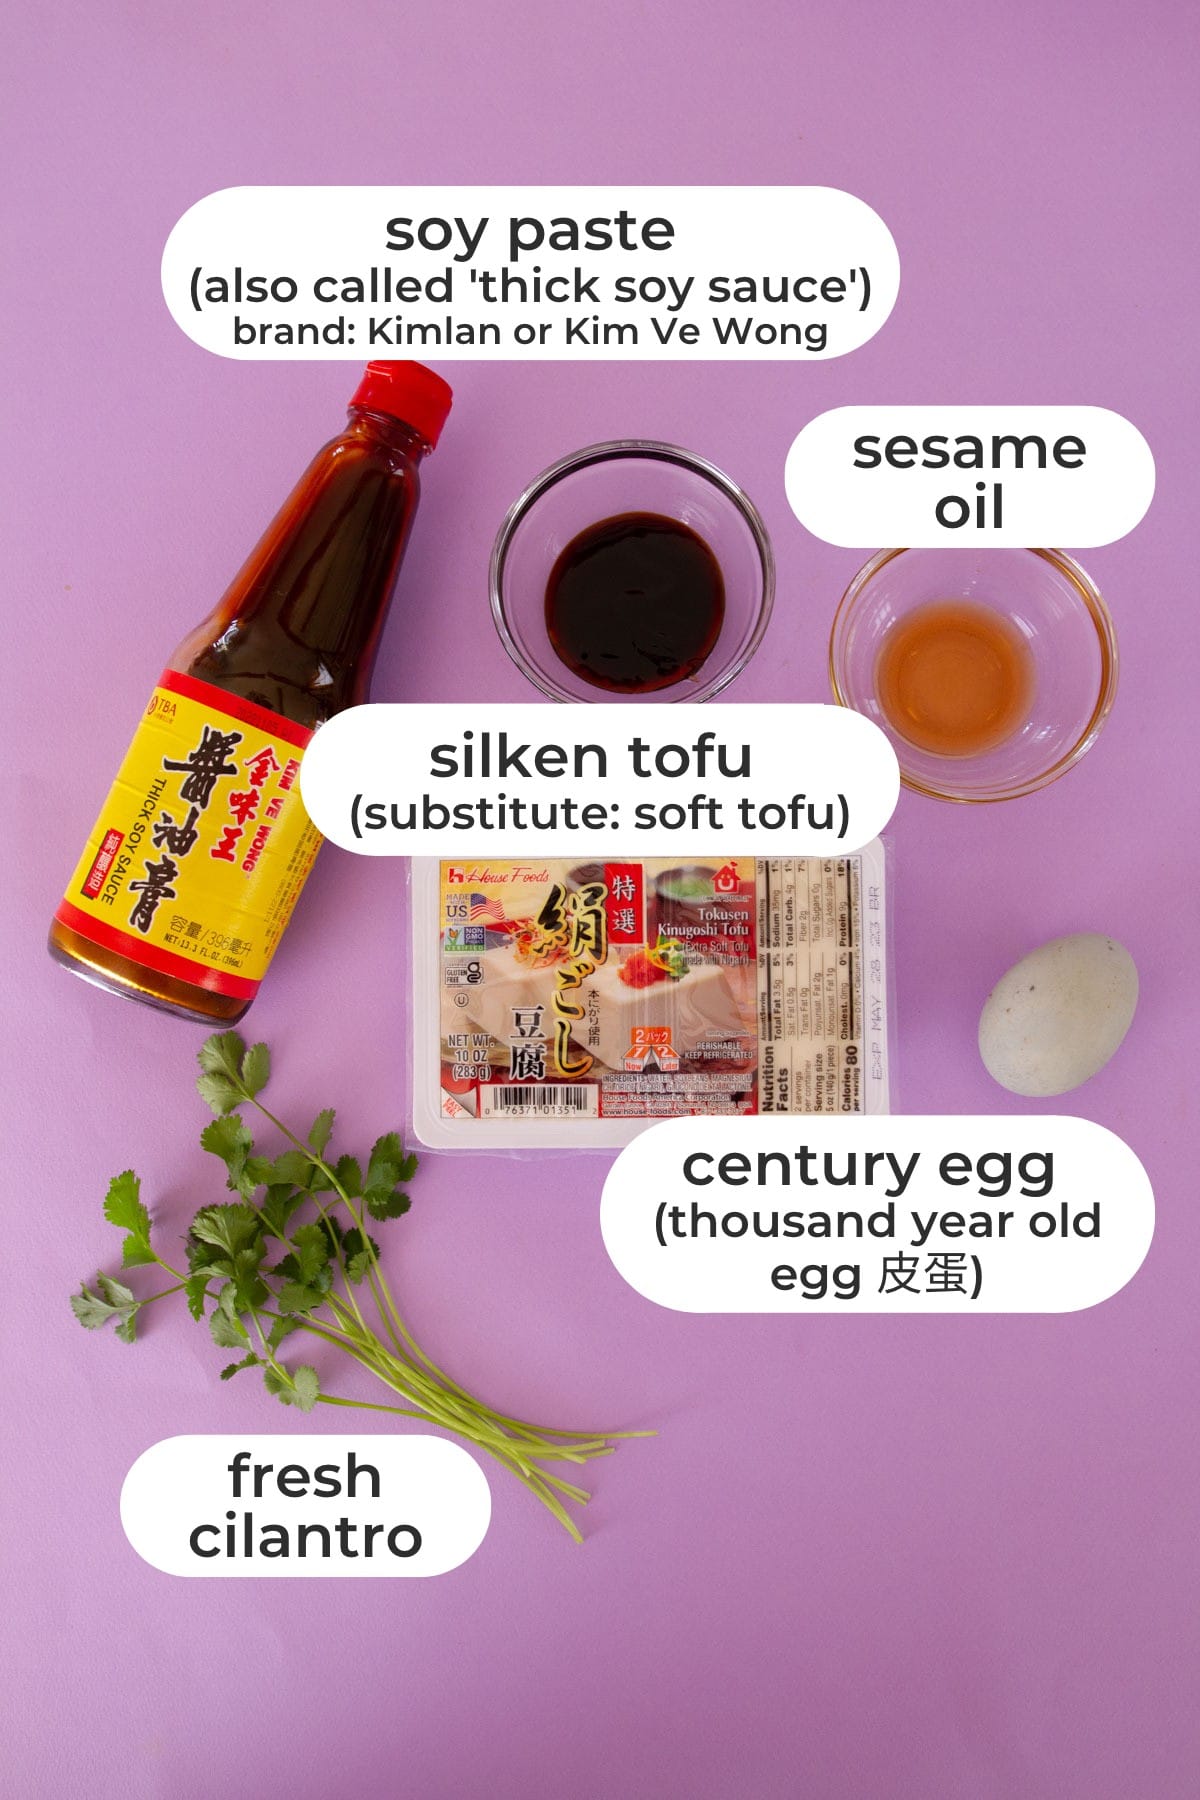 Ingredients for this recipe laid out on top of a purple background and labeled as: "soy paste (also called 'thick soy sauce', brand: Kimlan or Kim Ve Wong)," "sesame oil," "silken tofu (substitute: soft tofu)," "century egg (thousand year old egg 皮蛋," and "fresh cilantro."